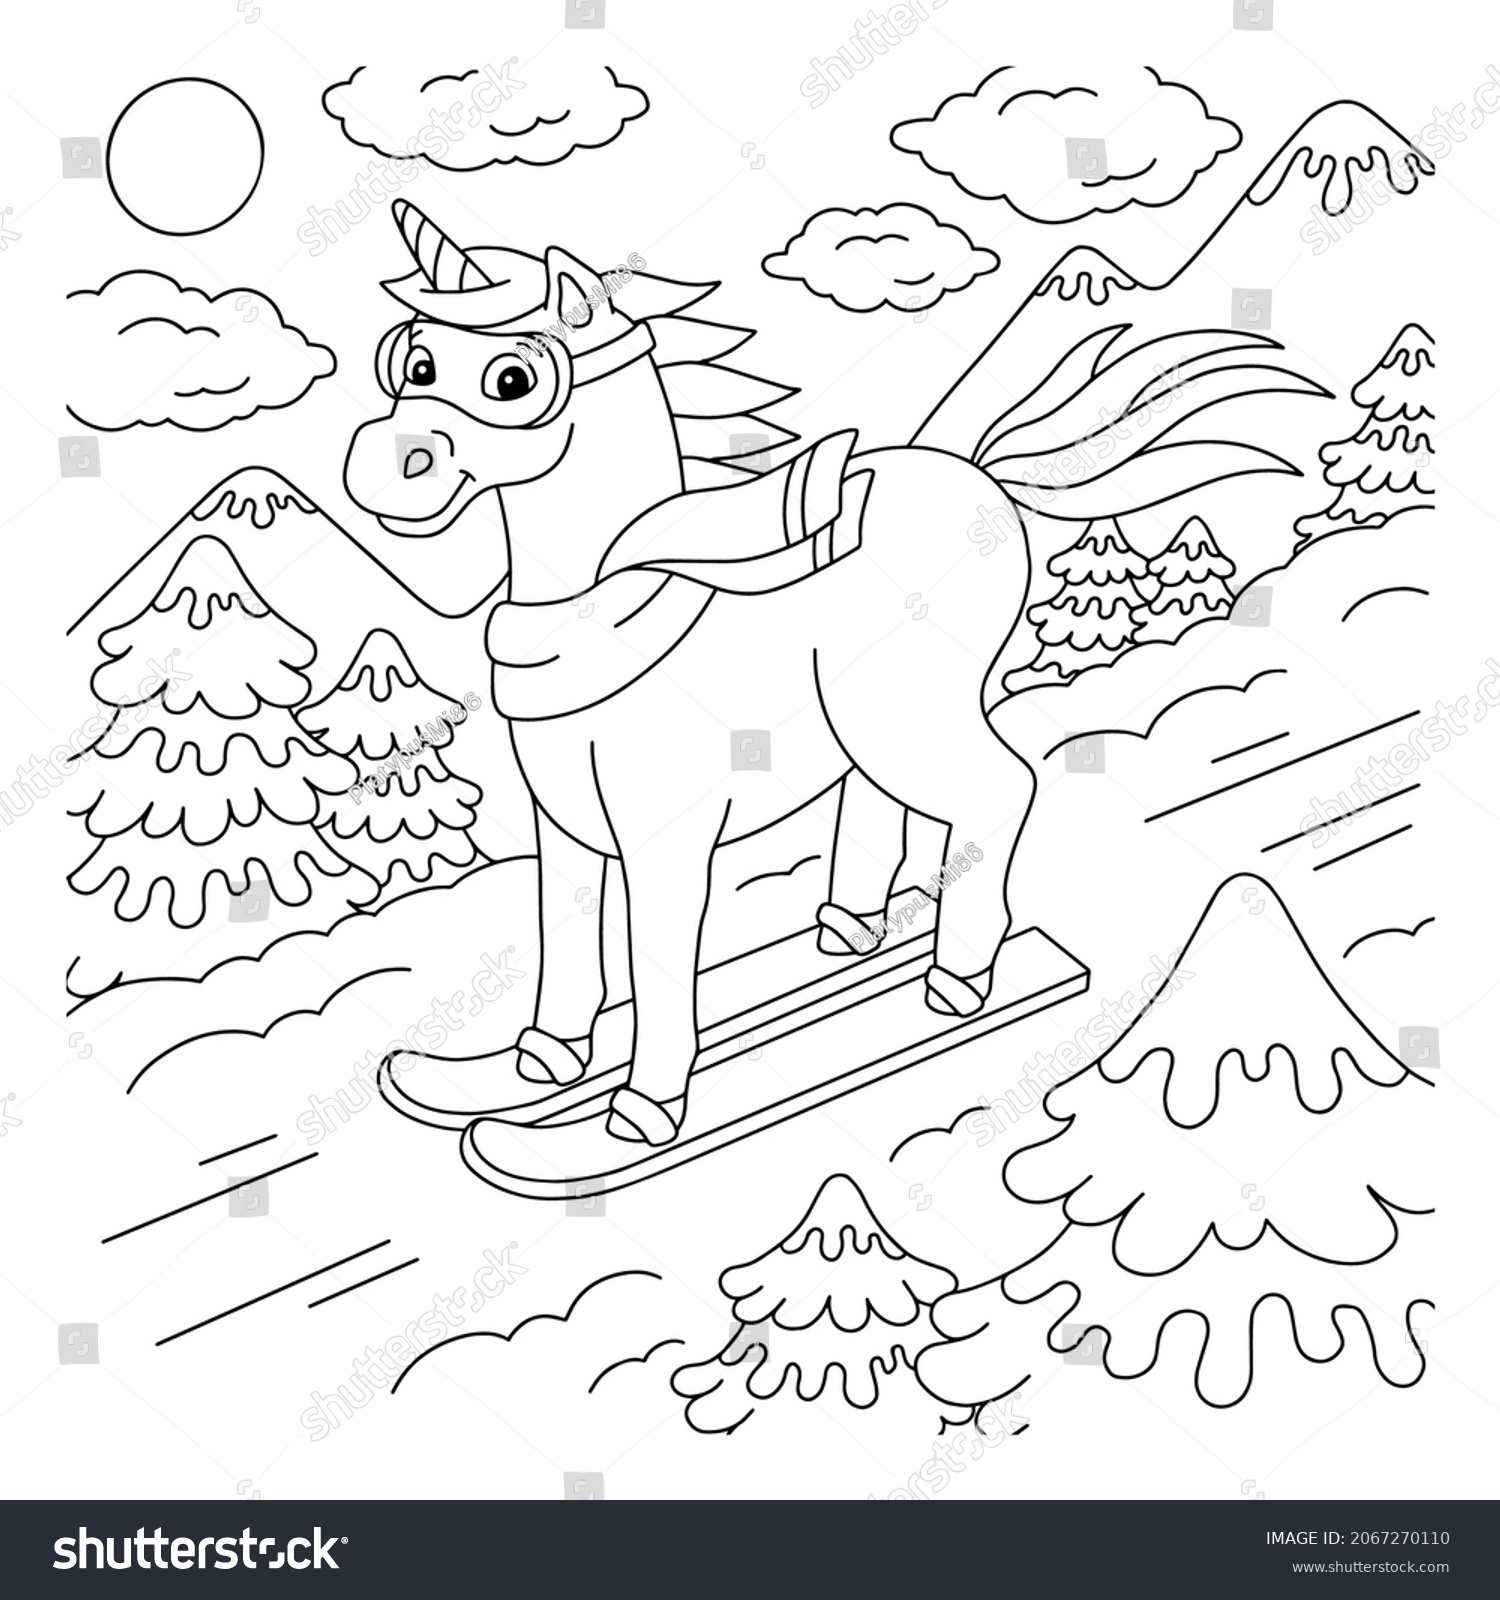 Unicorn Skiing Coloring Book Page Kids Stock Vector (Royalty Free ...